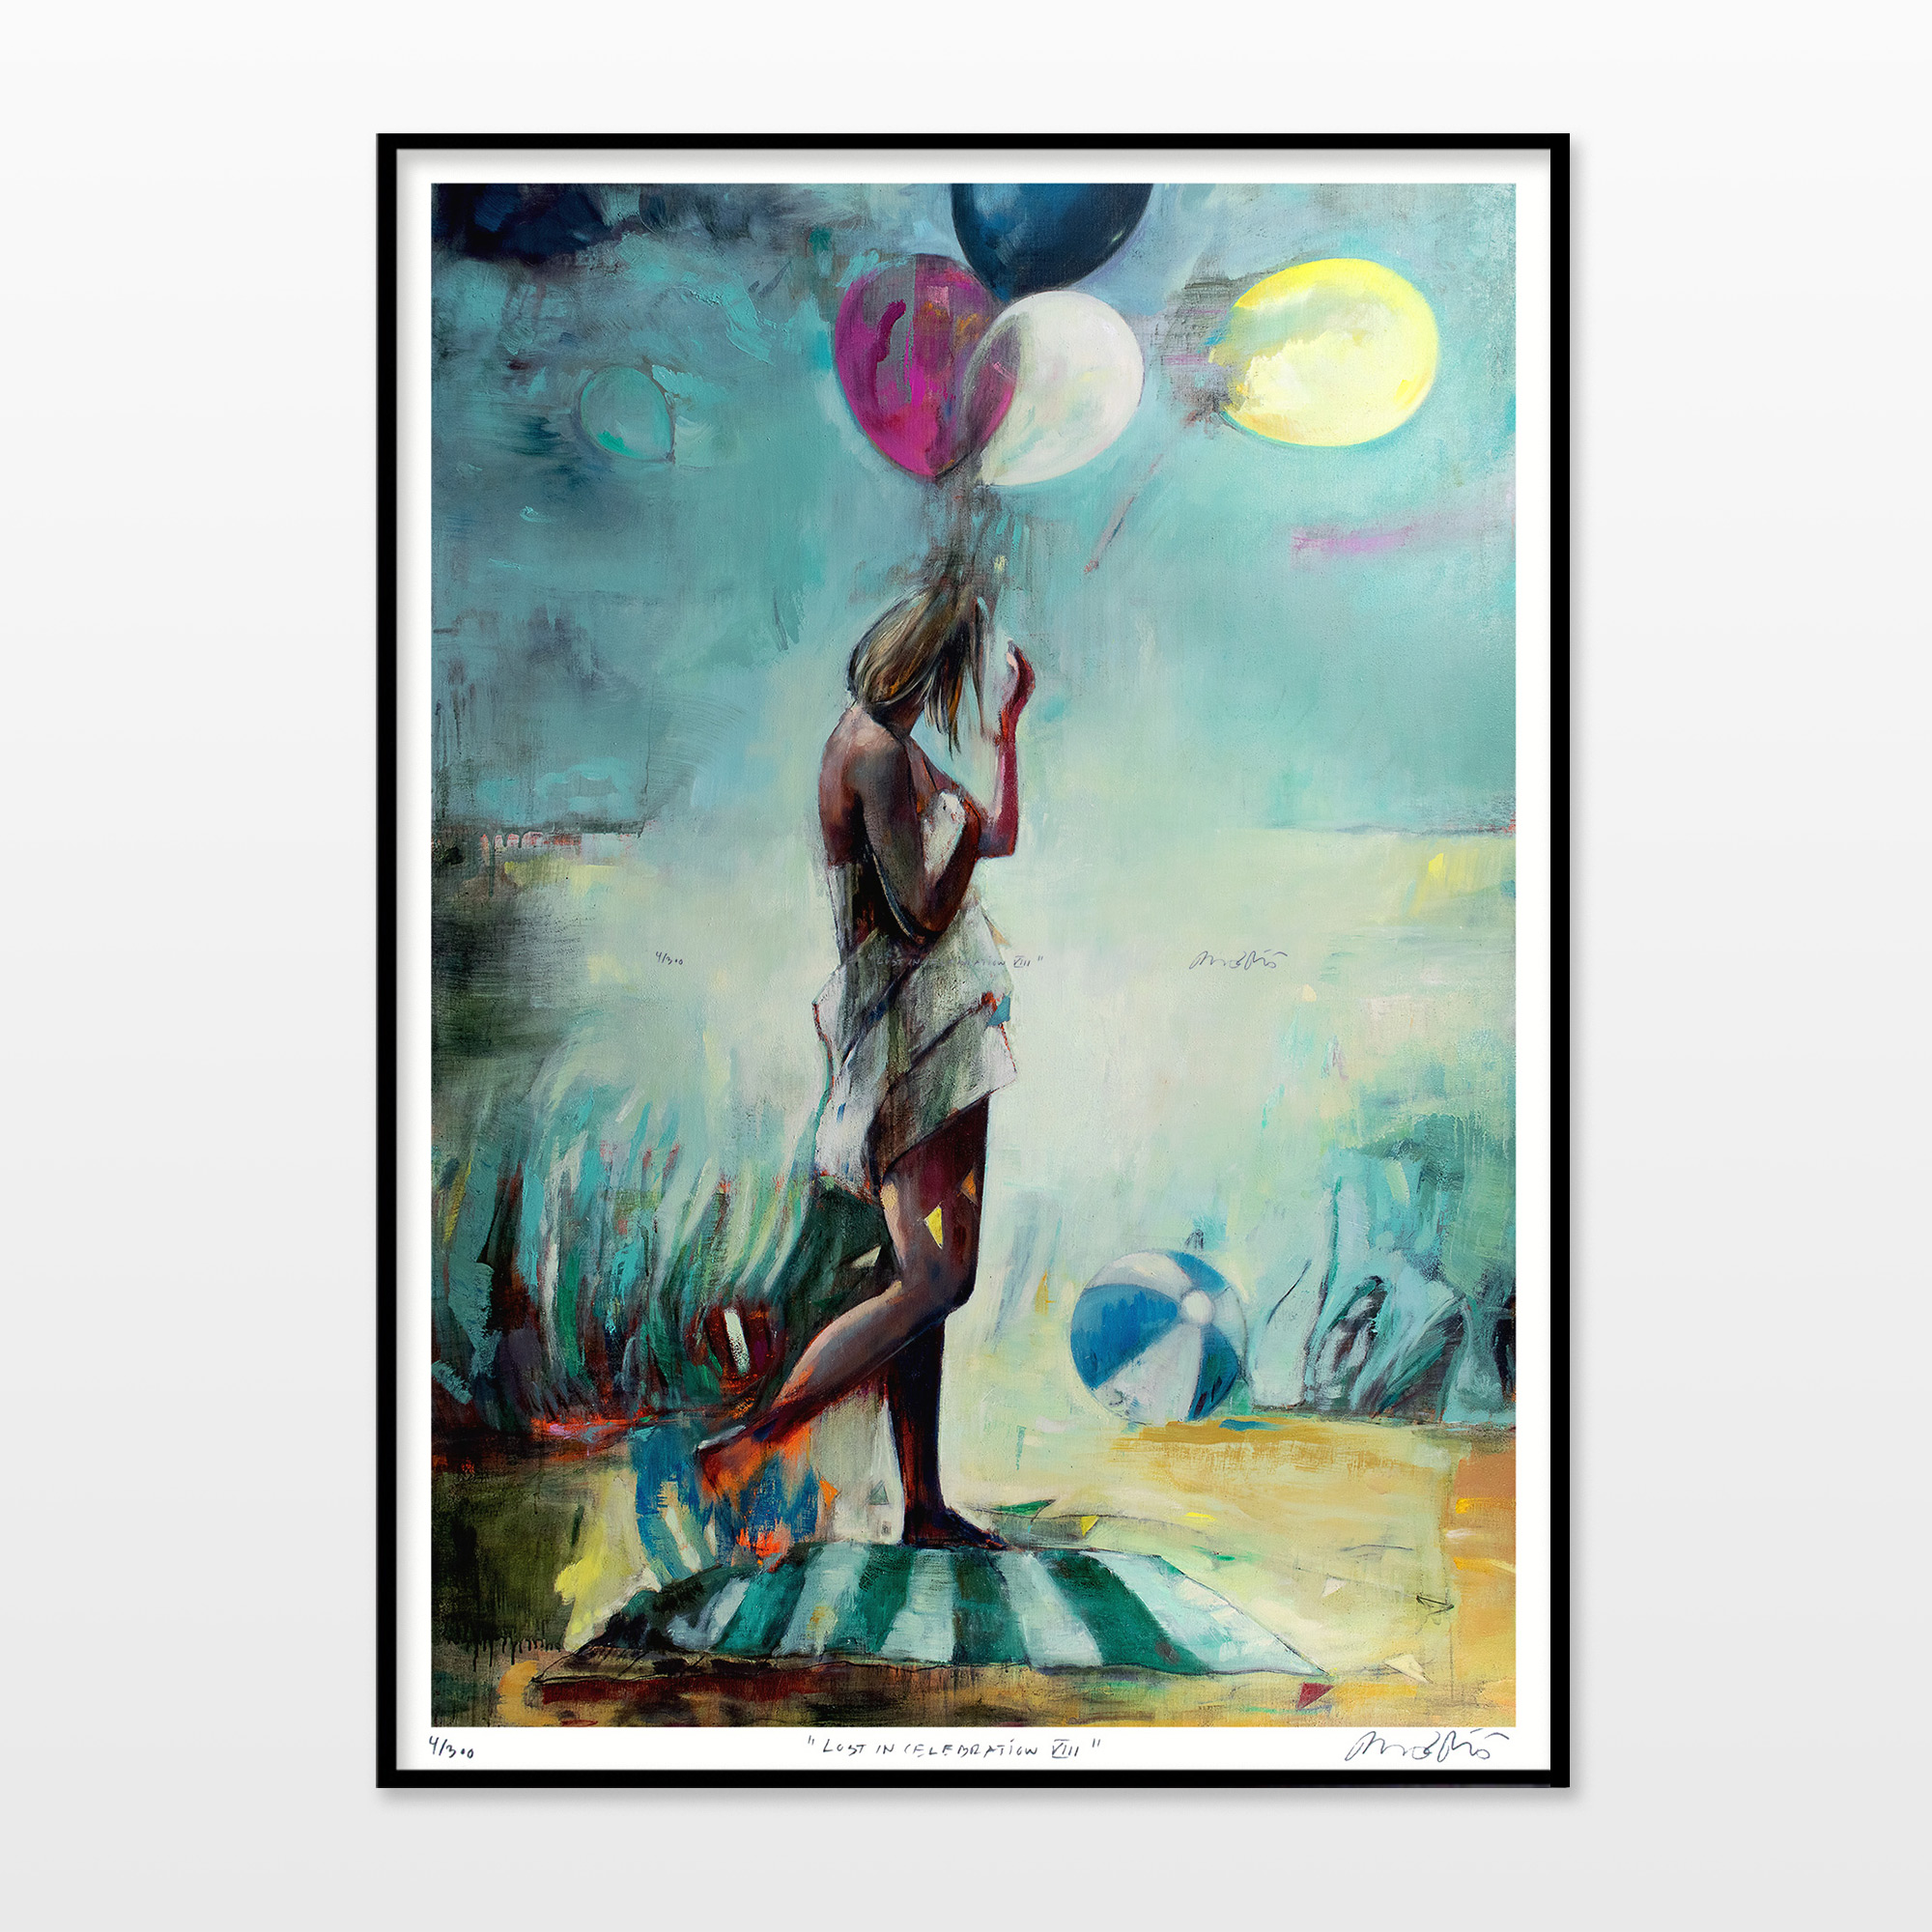 posters-prints, giclee-print, aesthetic, colorful, figurative, graphical, illustrative, landscape, portraiture, bodies, nature, oceans, people, sky, black, blue, green, turquoise, yellow, ink, paper, beach, beautiful, danish, decorative, design, interior, interior-design, modern, nordic, posters, pretty, scandinavien, summer, Buy original high quality art. Paintings, drawings, limited edition prints & posters by talented artists.